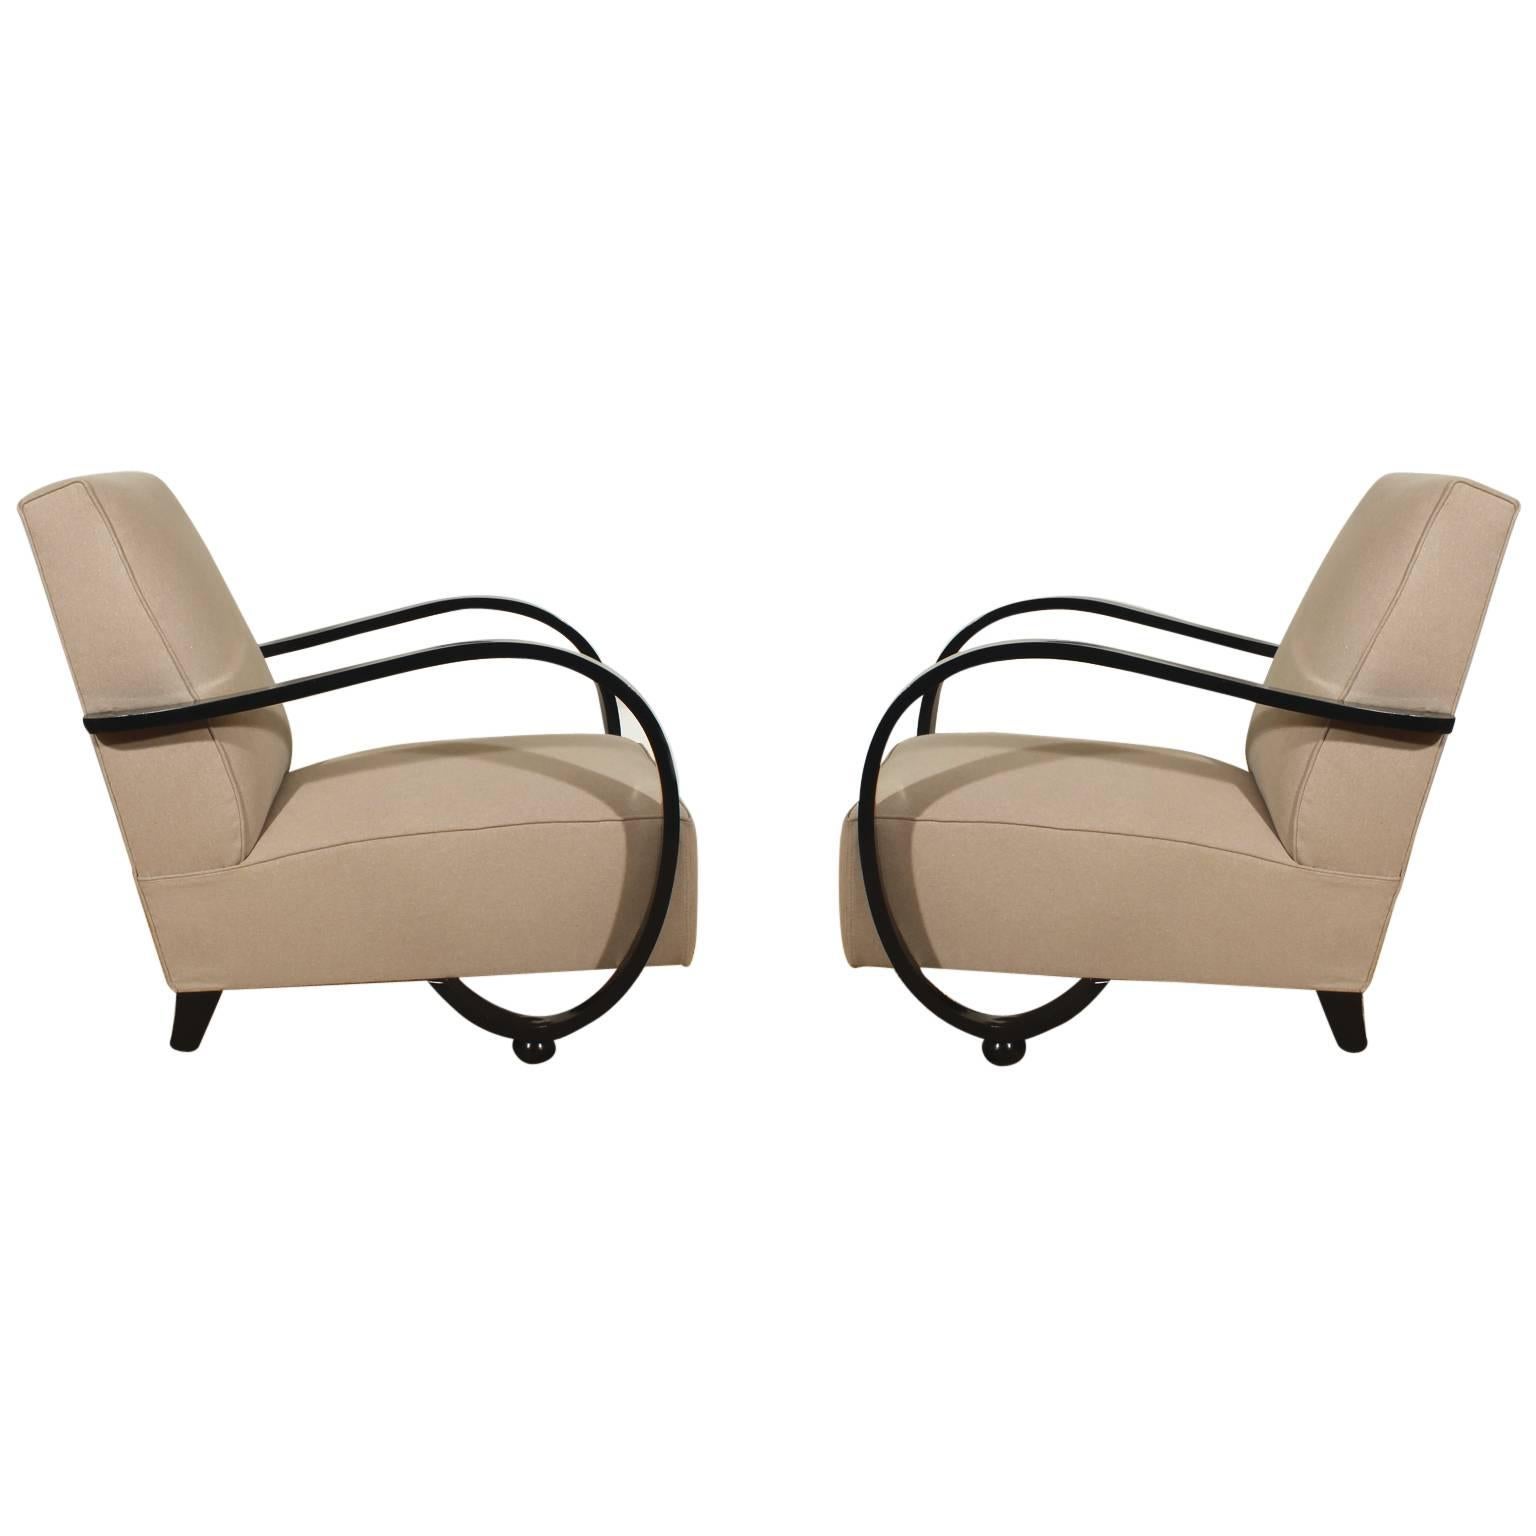 Pair of low armchairs from the 1940´s